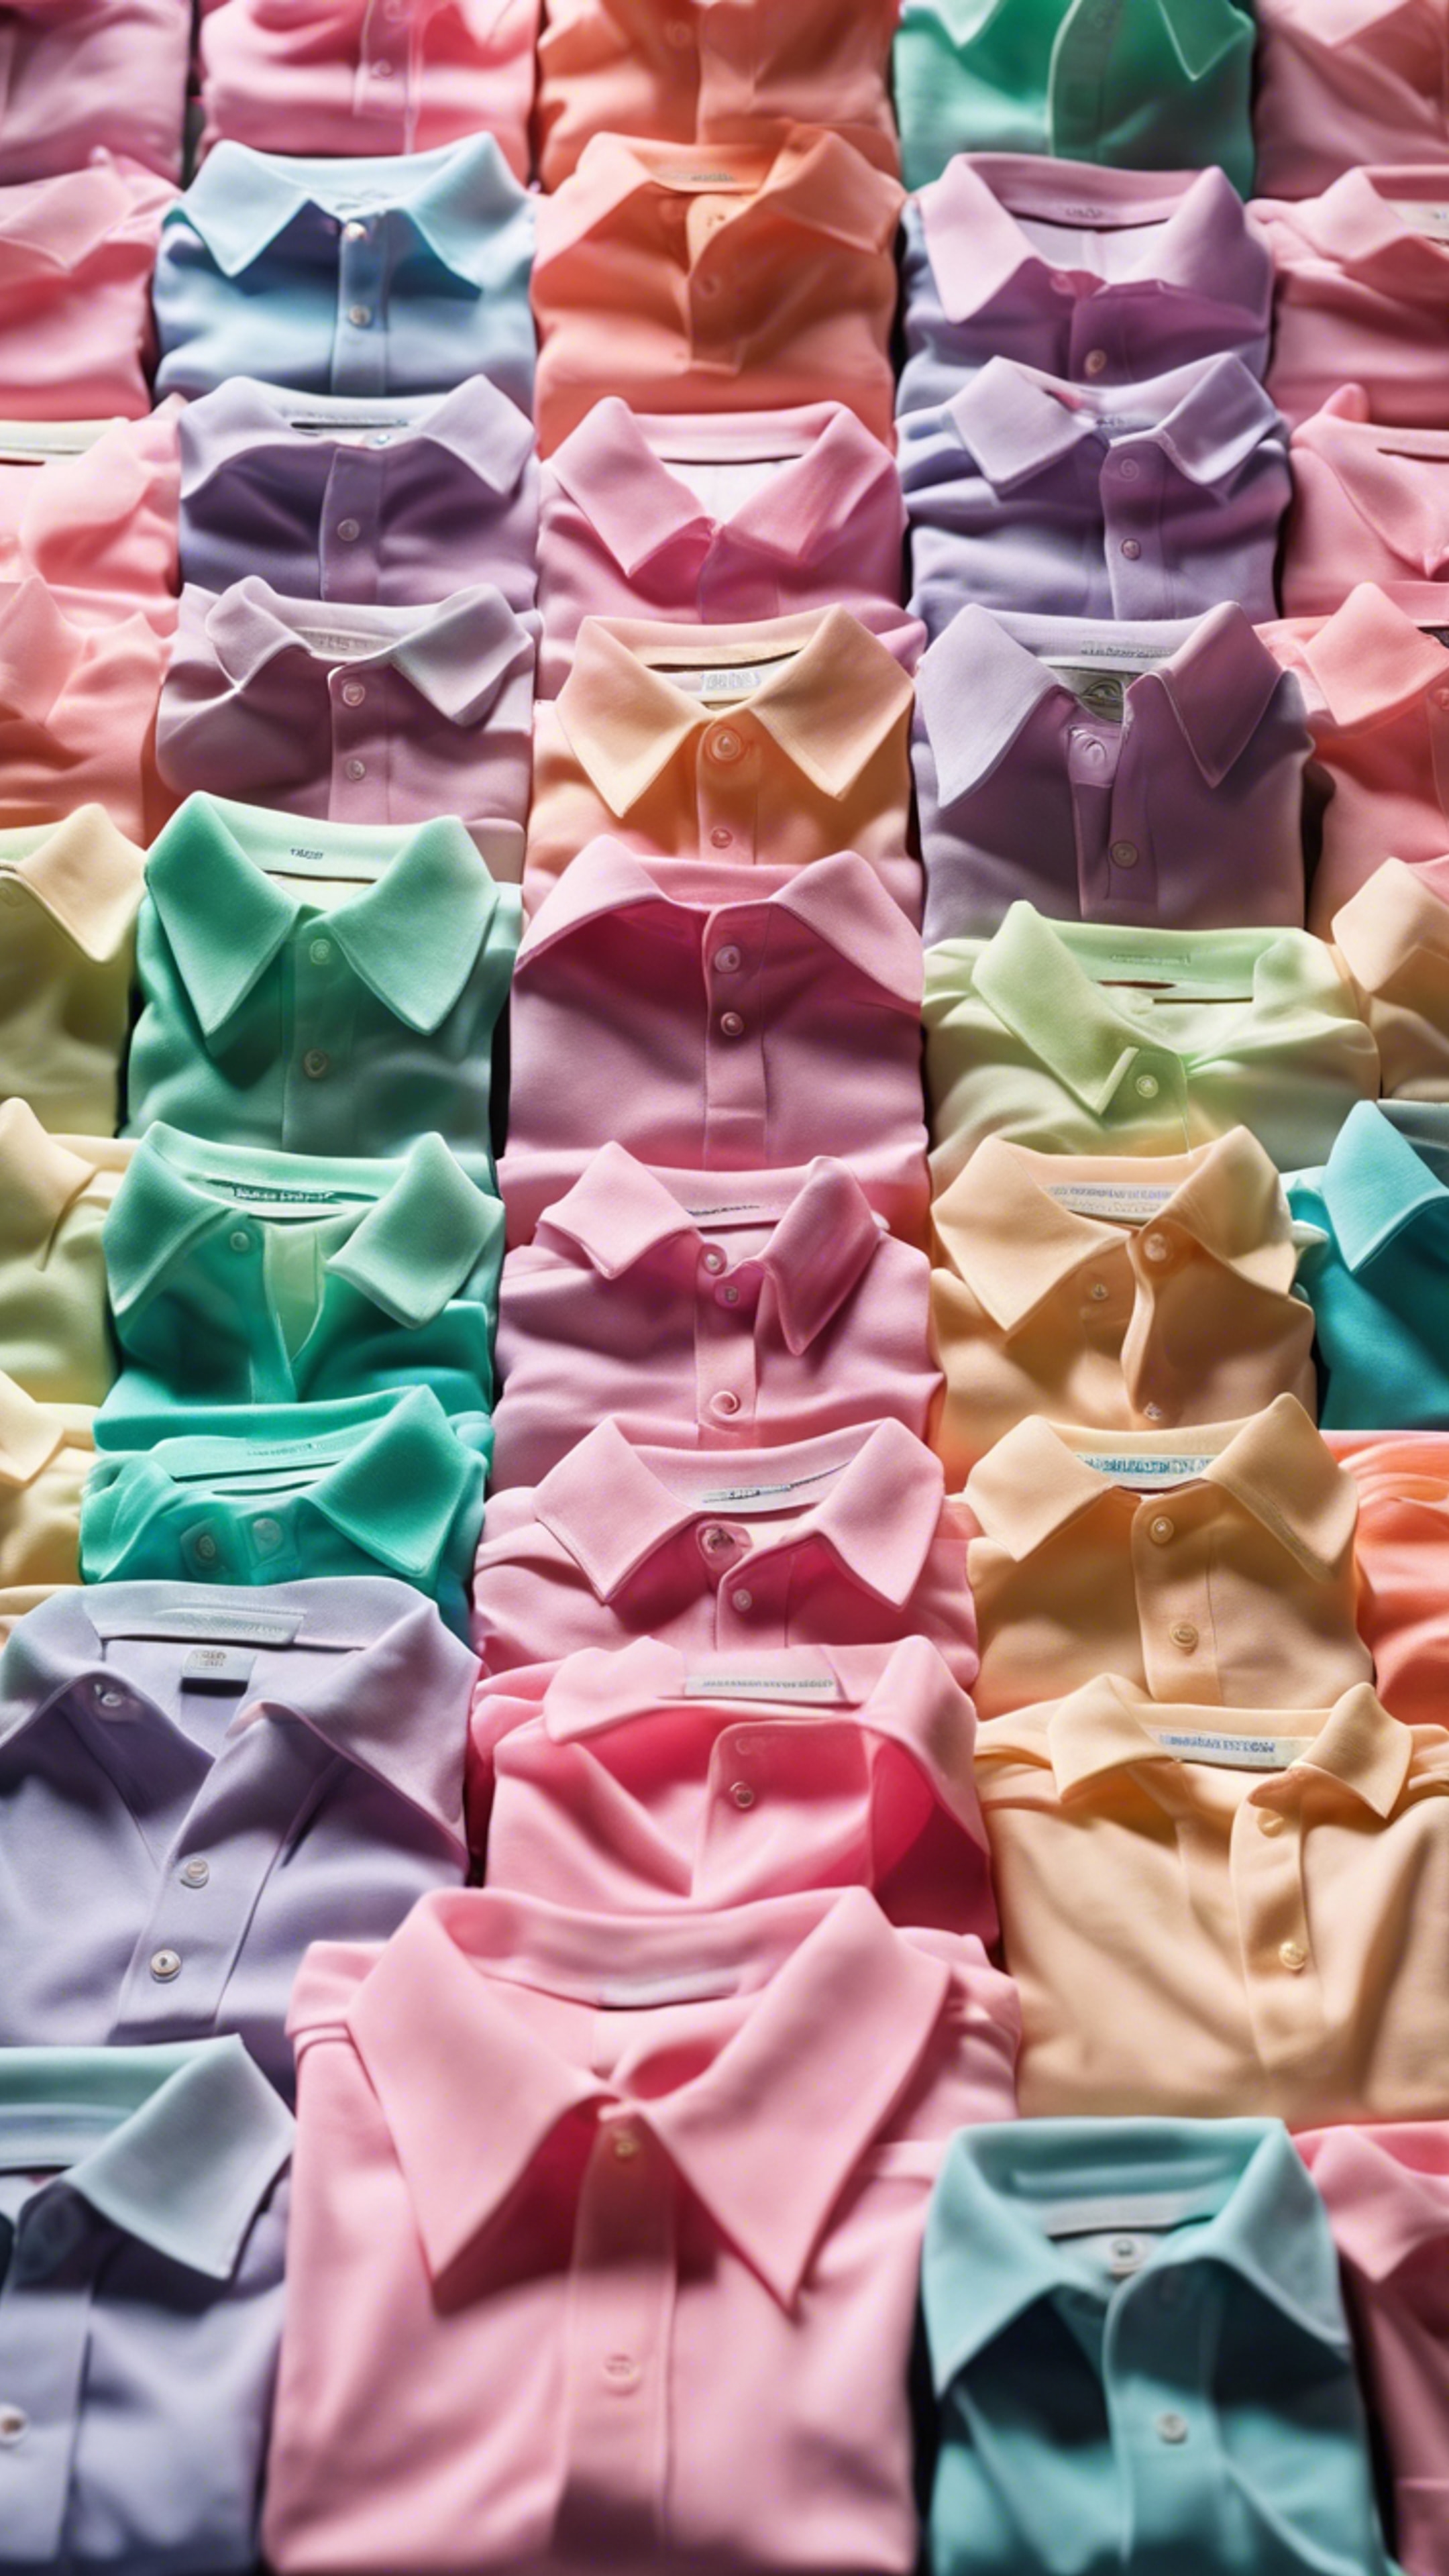 An array of neon pastel polos neatly arranged in a preppy boutique. Hintergrund[90c24010f8ed4e2d91c1]